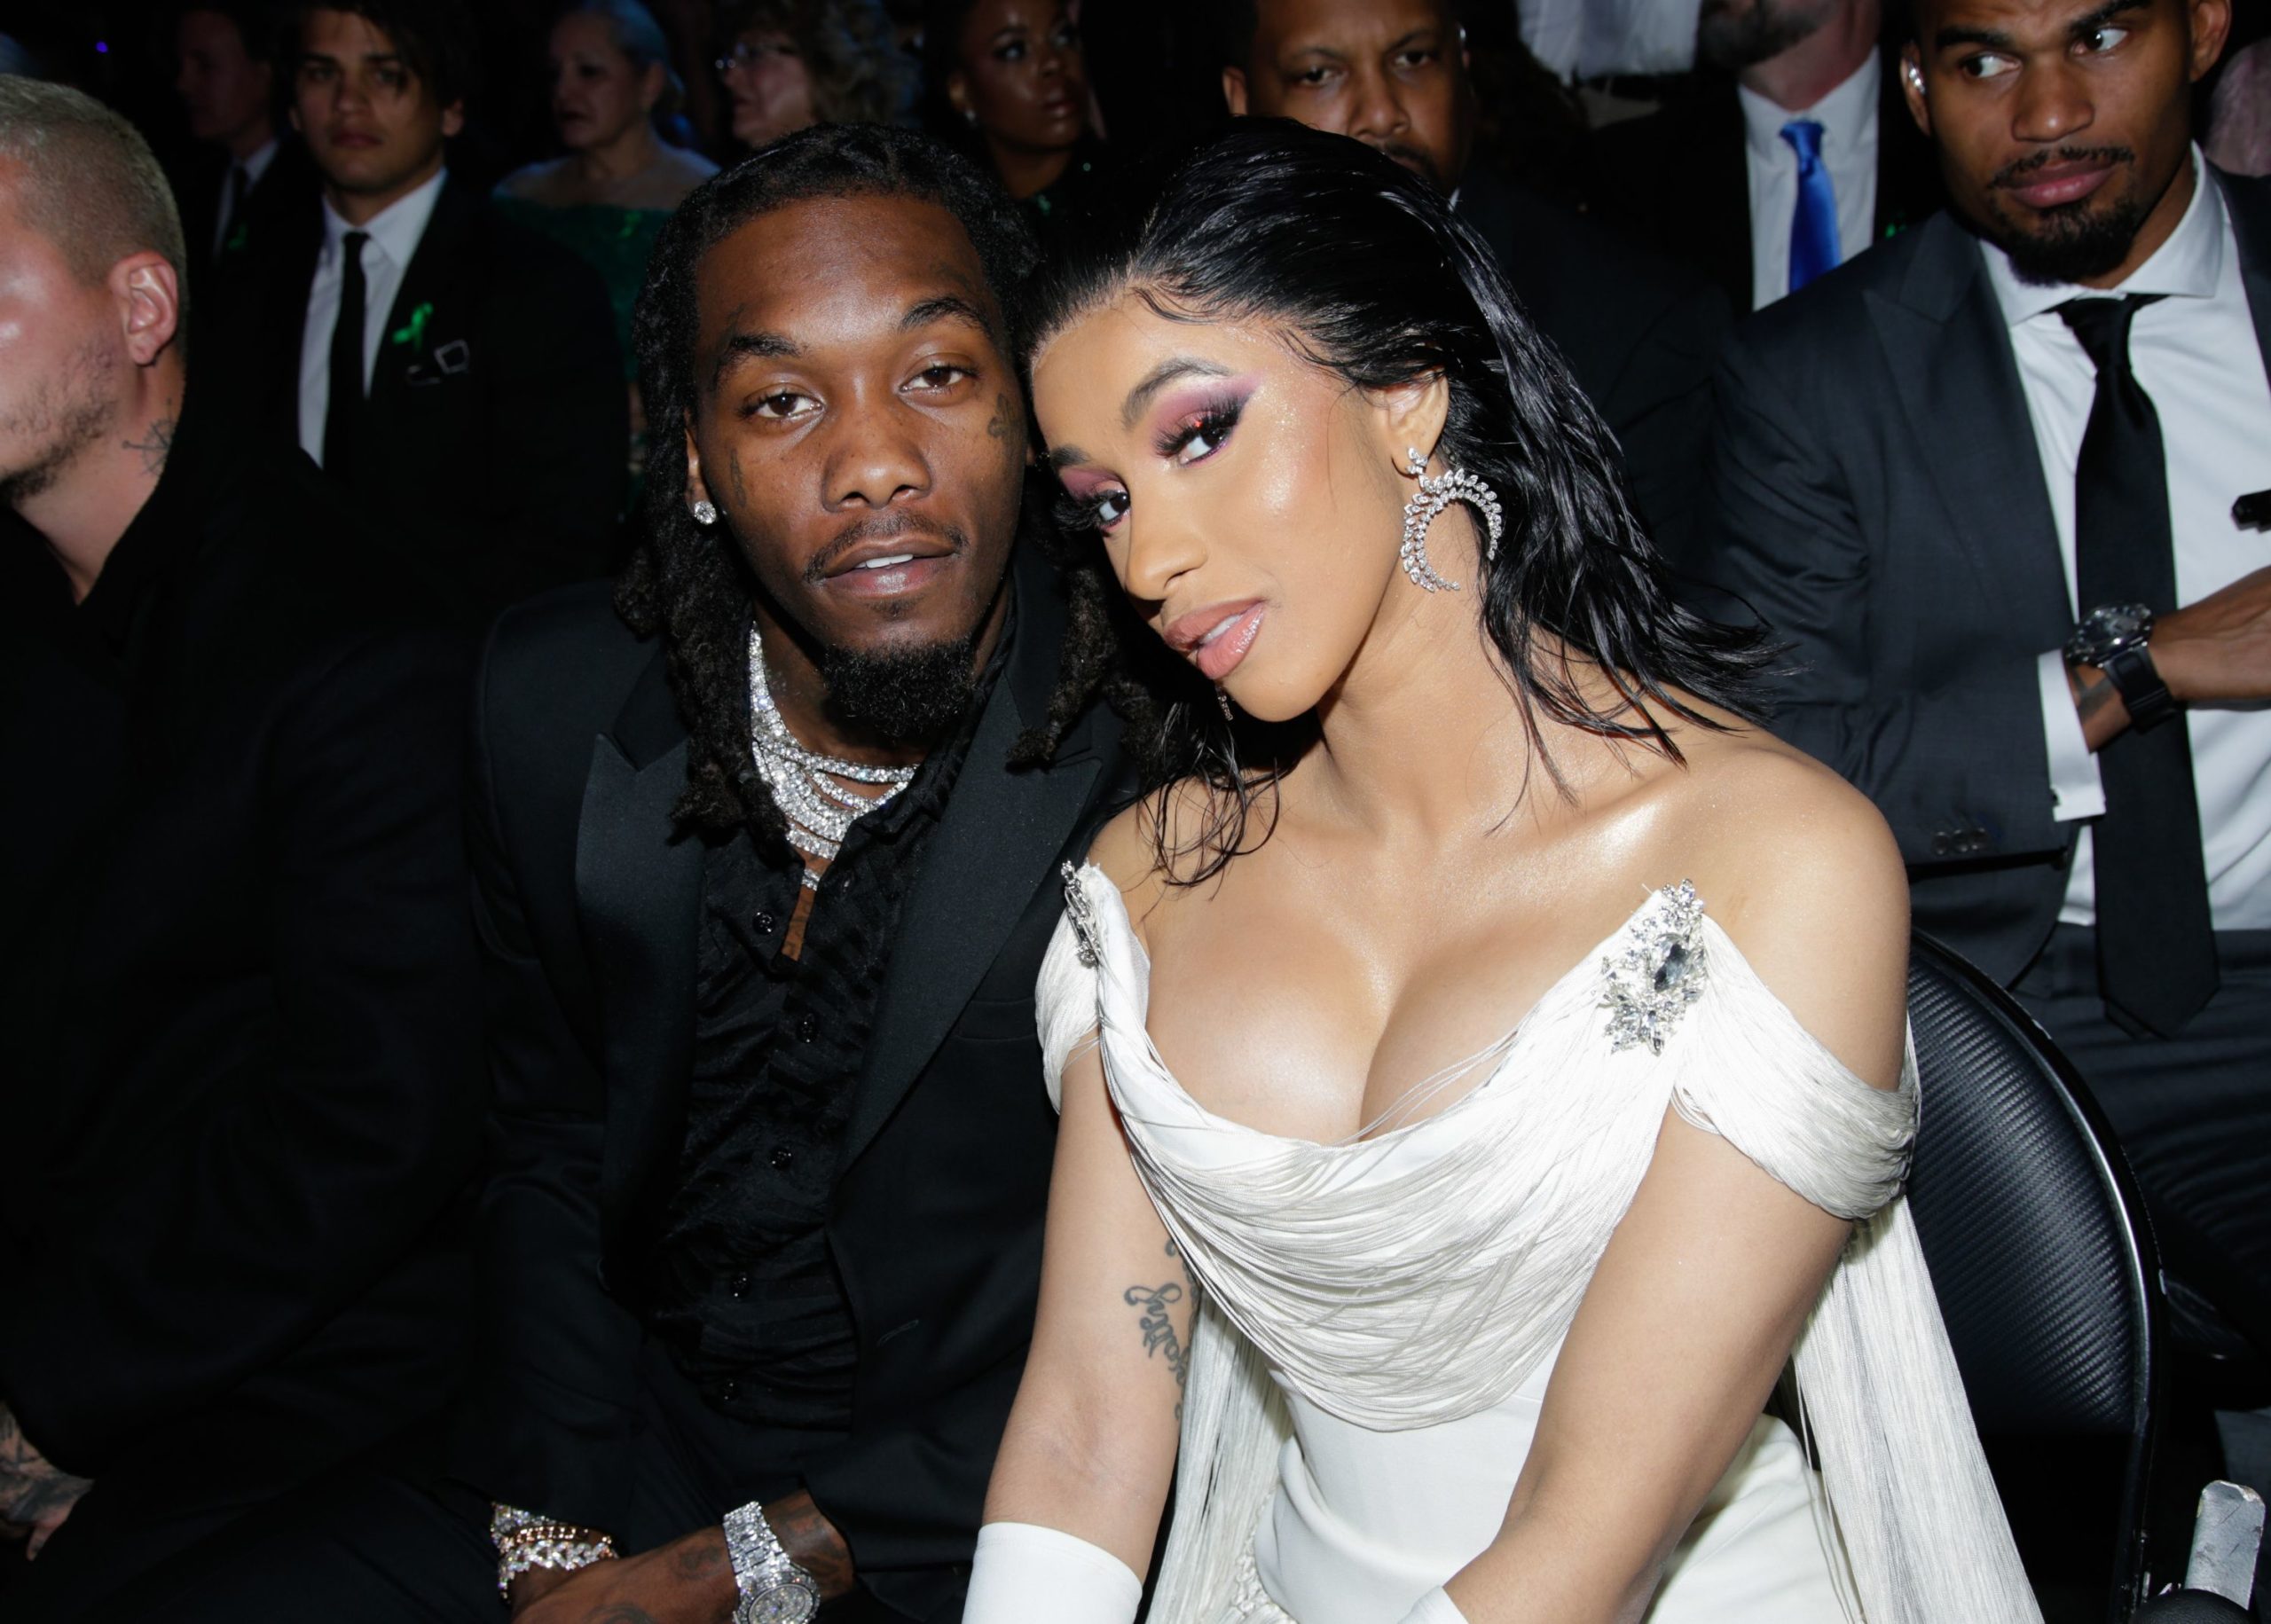 Cardi B and Offset Have Their Second baby As Proud Parents!